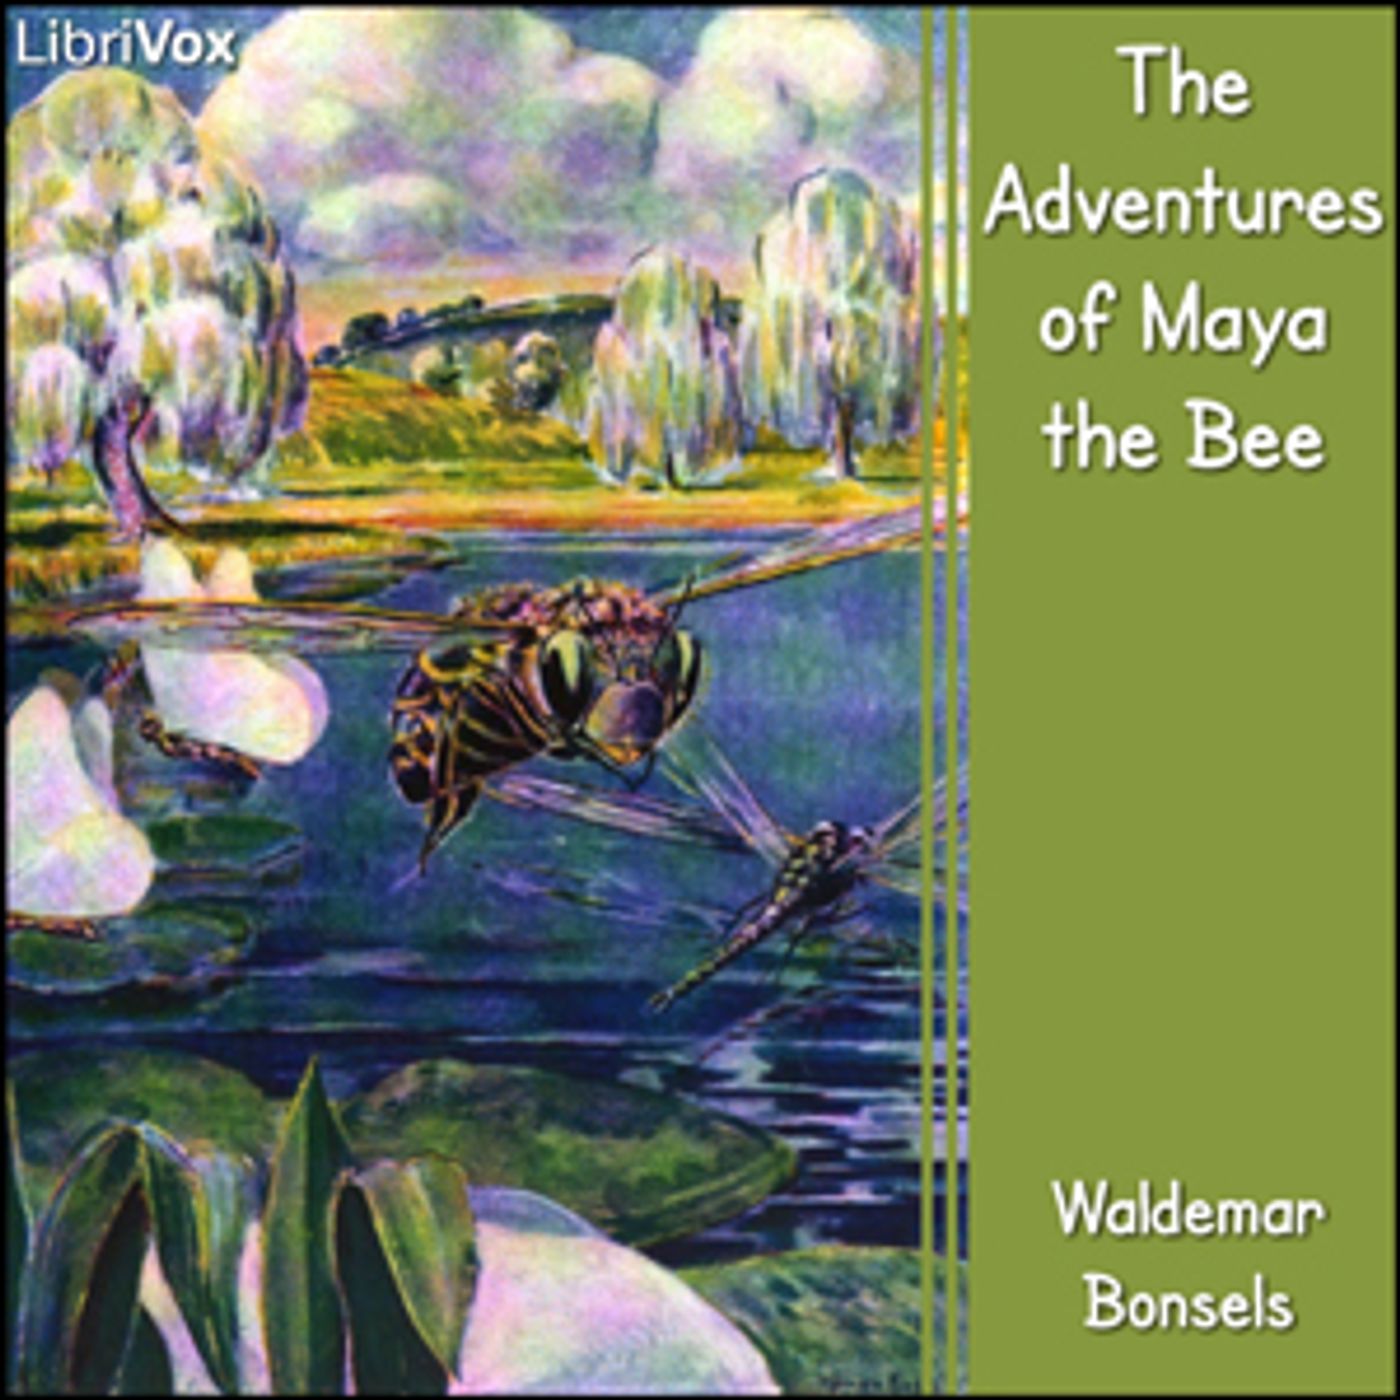 Adventures of Maya the Bee, The by Waldemar Bonsels (1880 - 1952)